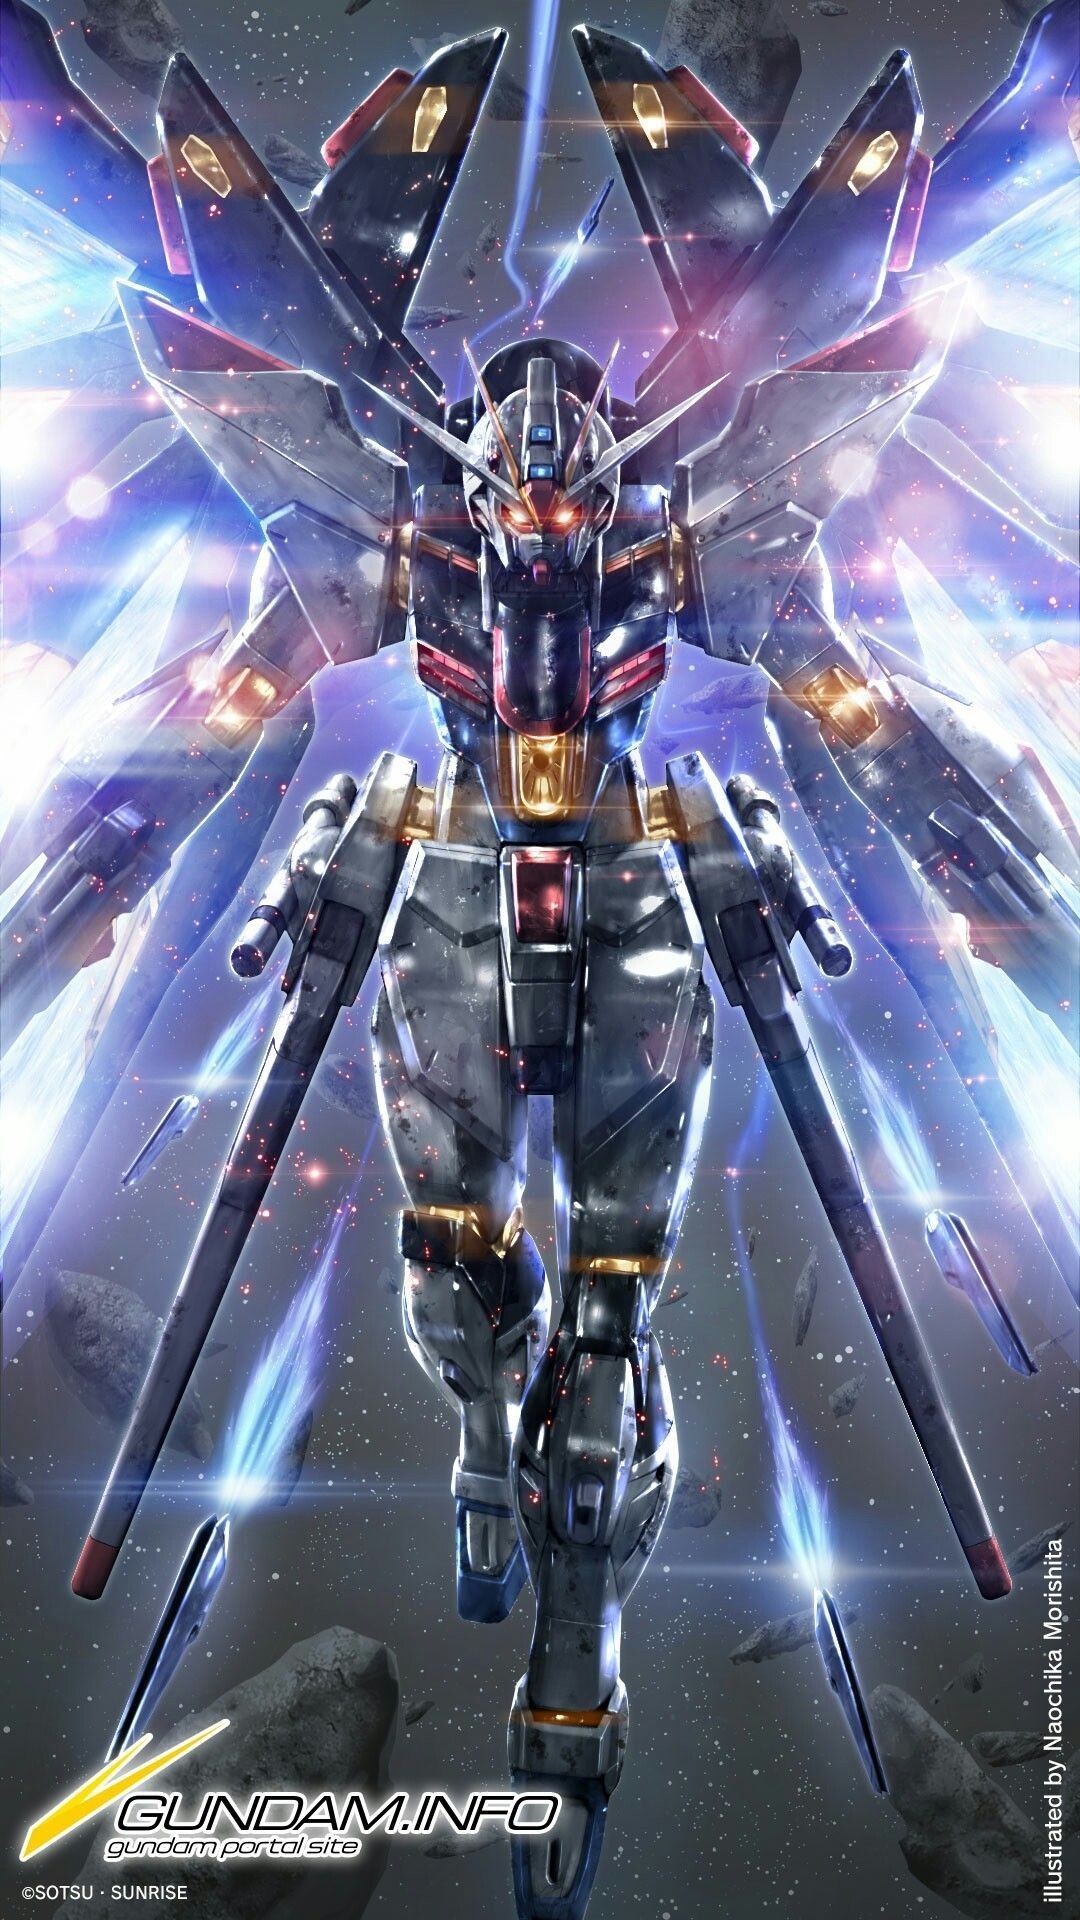 Live Wallpapers tagged with Gundam